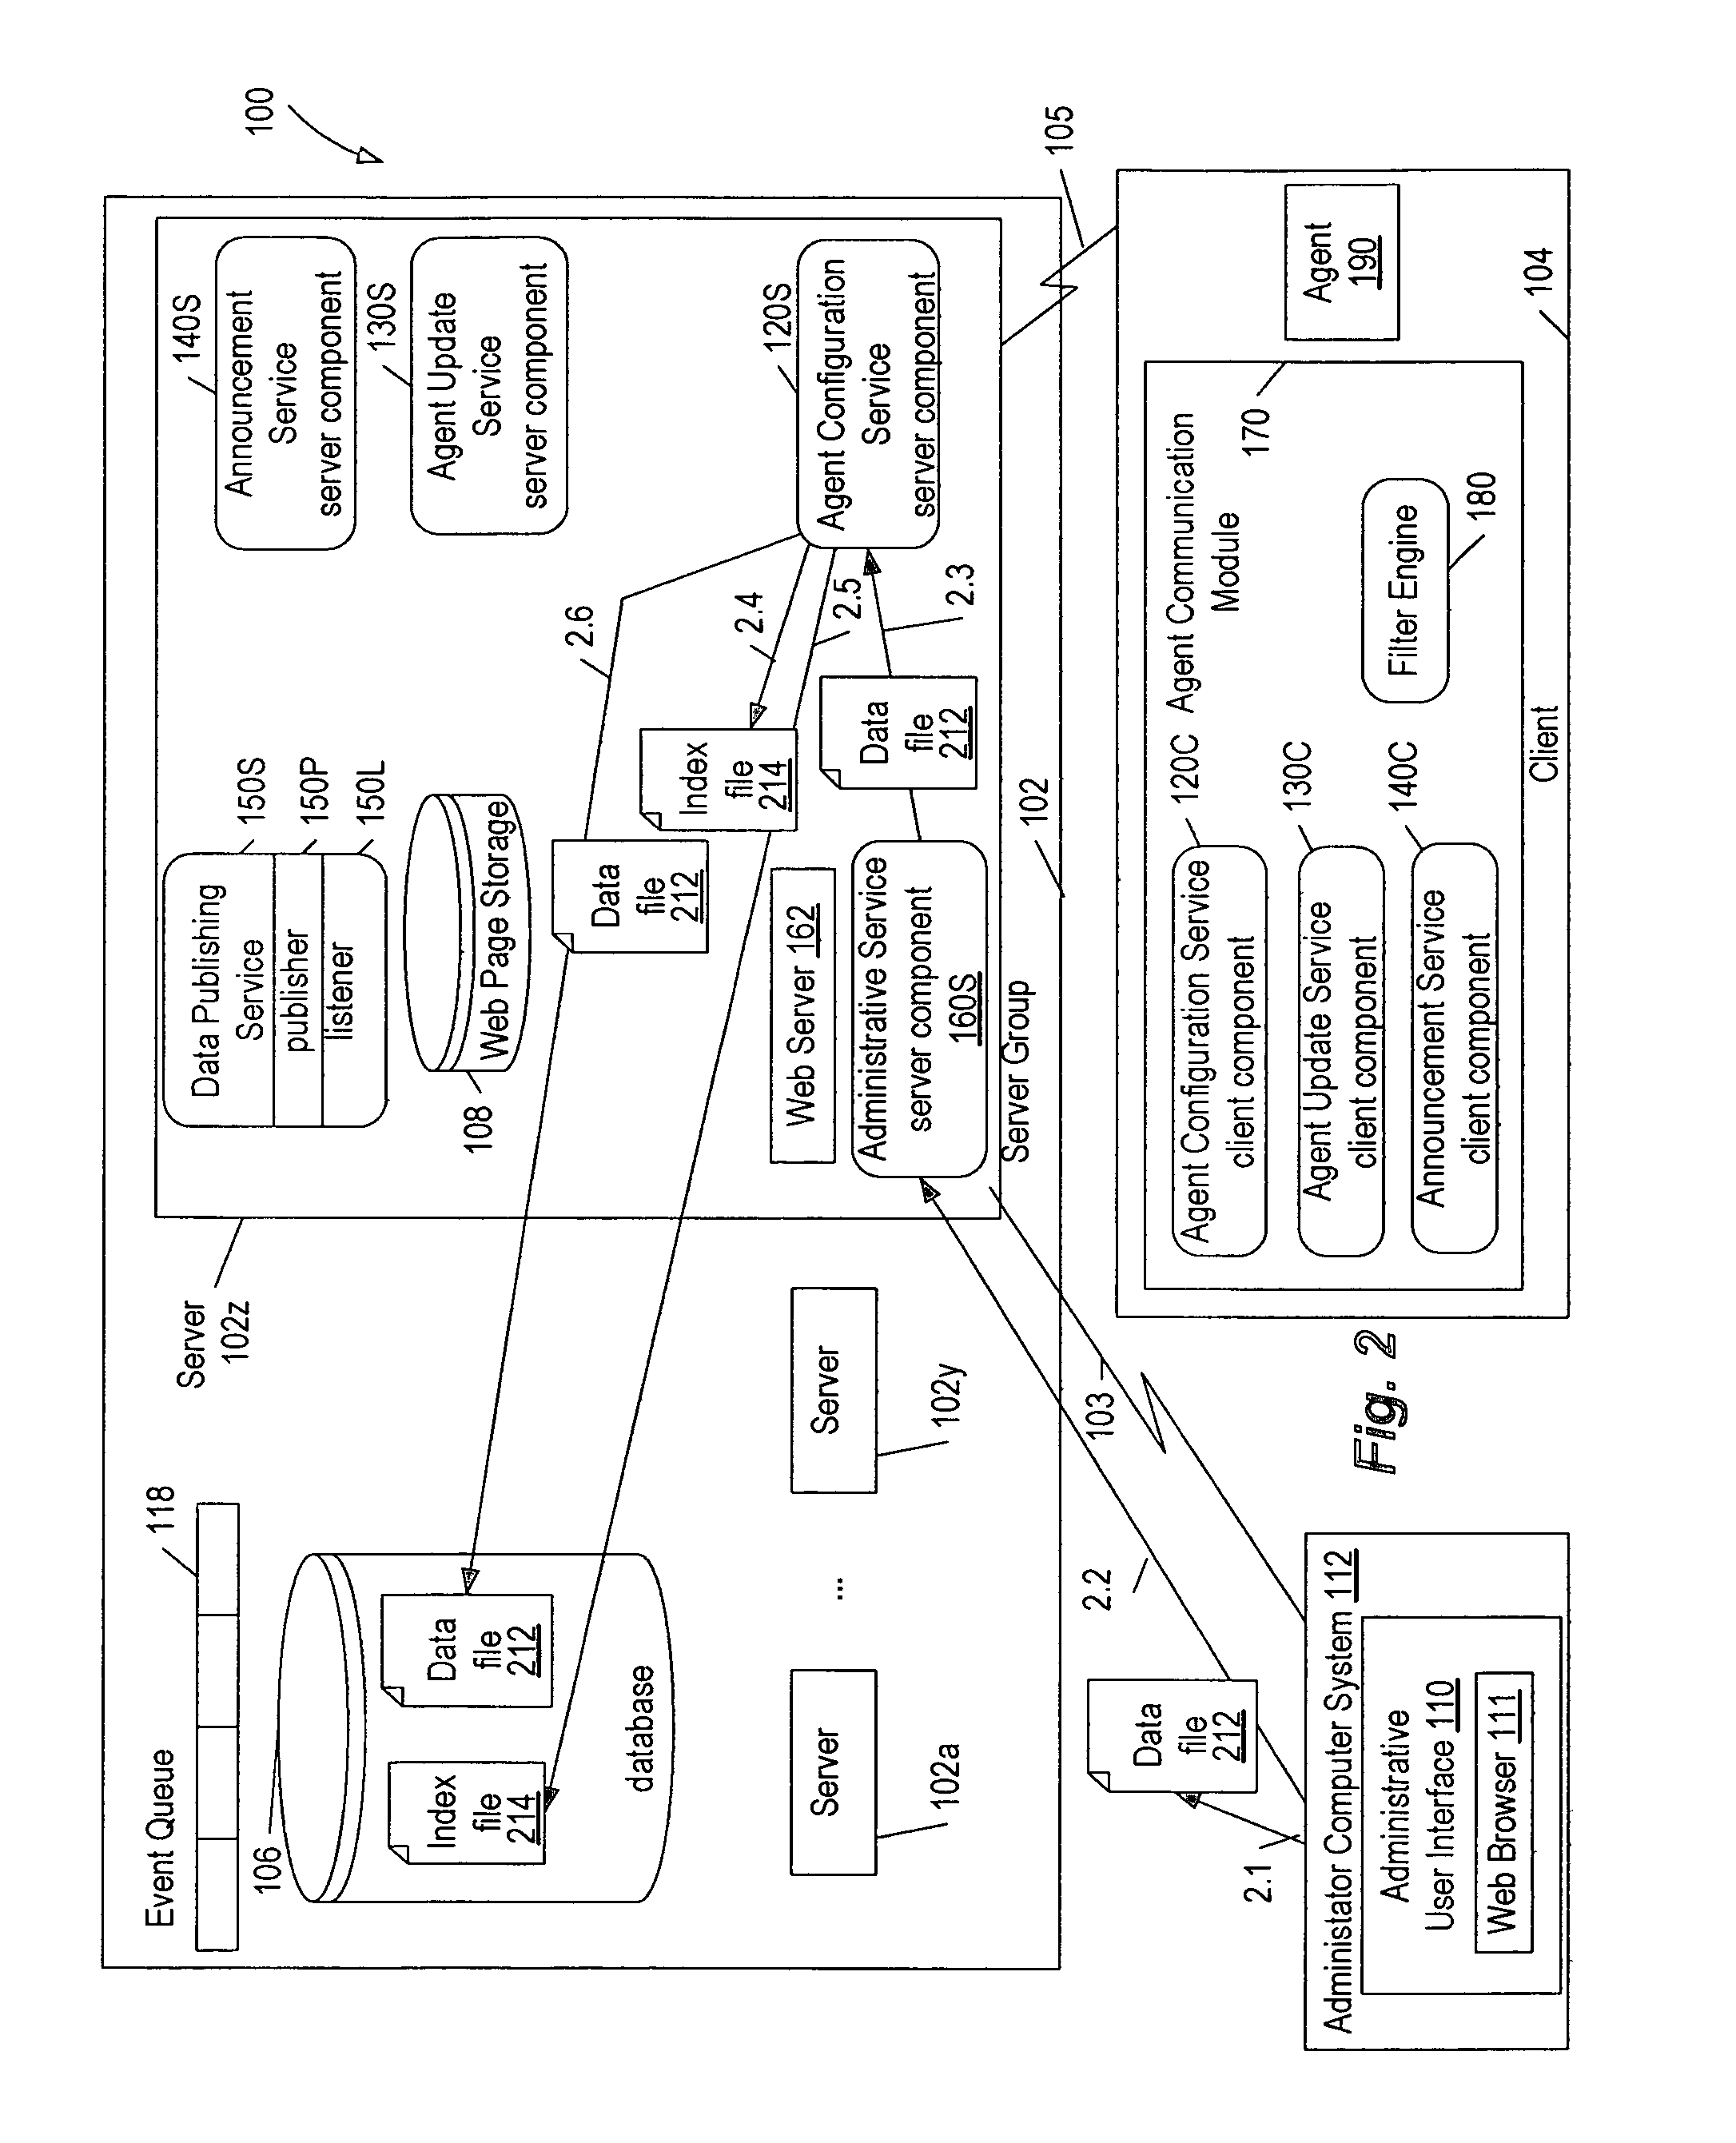 Large-scale targeted data distribution system